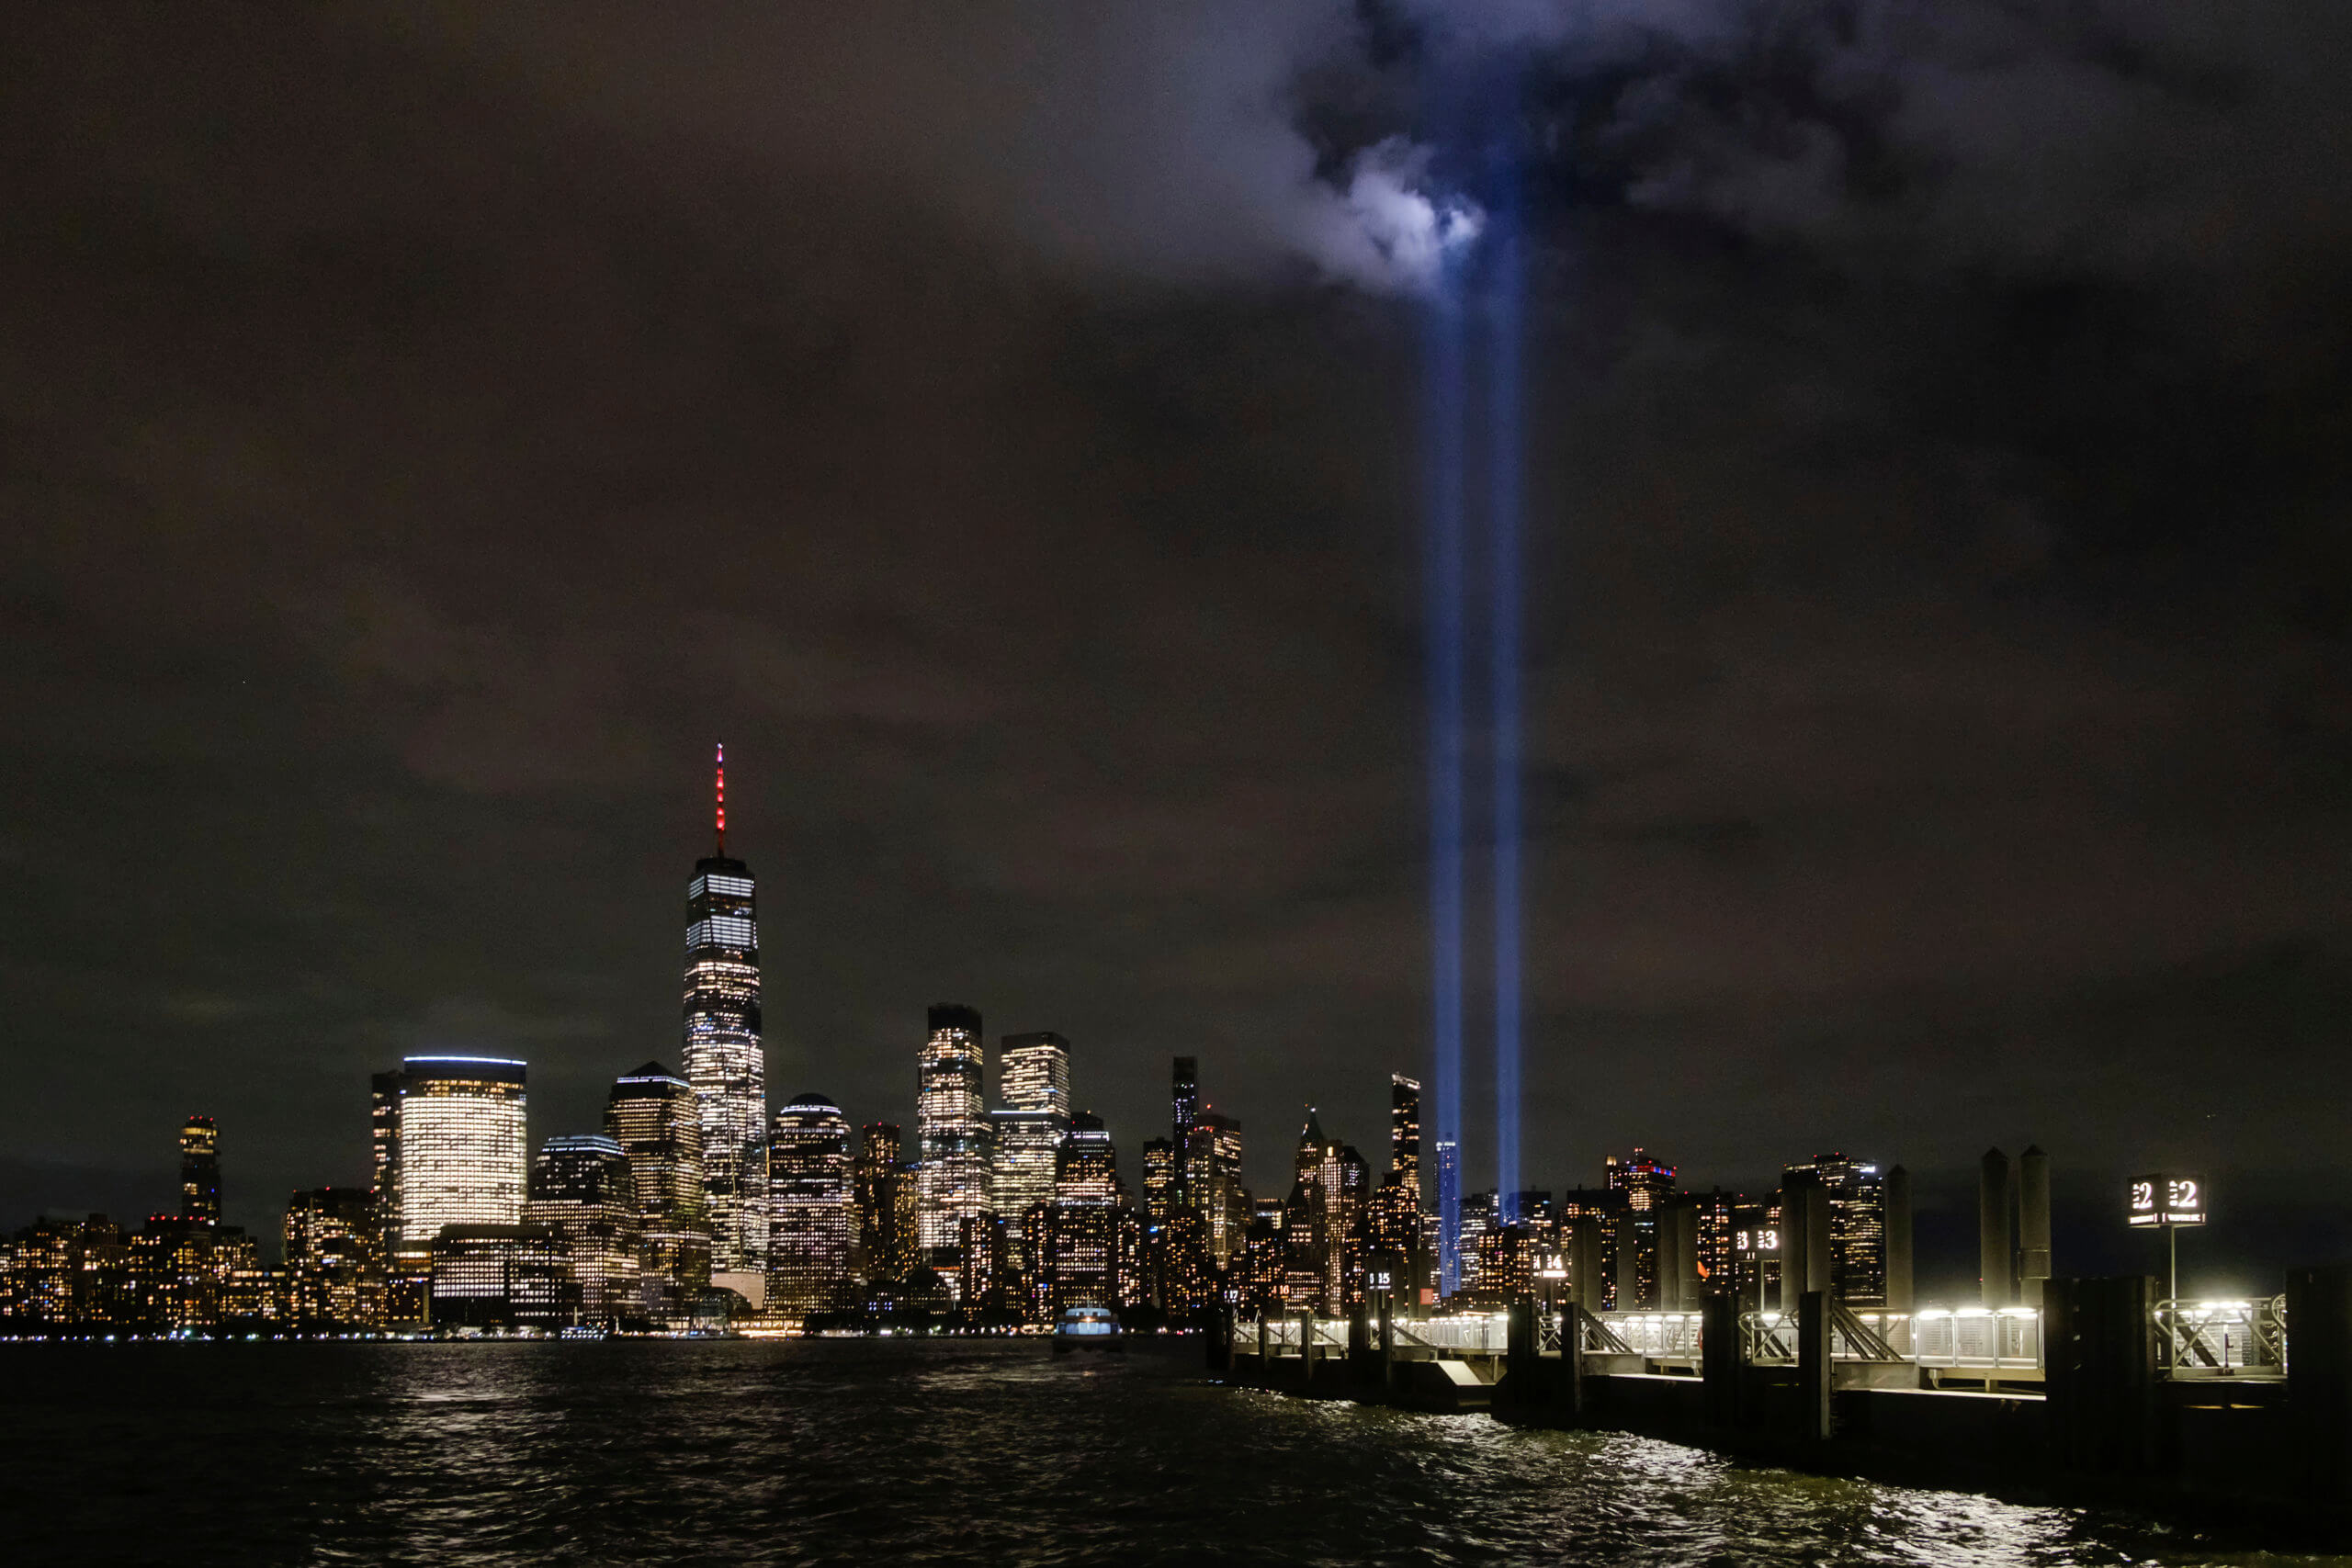 Twin beams of light commemorating the fallen twin towers of the World Trade Center are tested Wednesday night, Sept. 7, 2022, in New York City in advance of the 21st annual memorial of the Sept. 11 attacks. (AP Photo/J. David Ake)